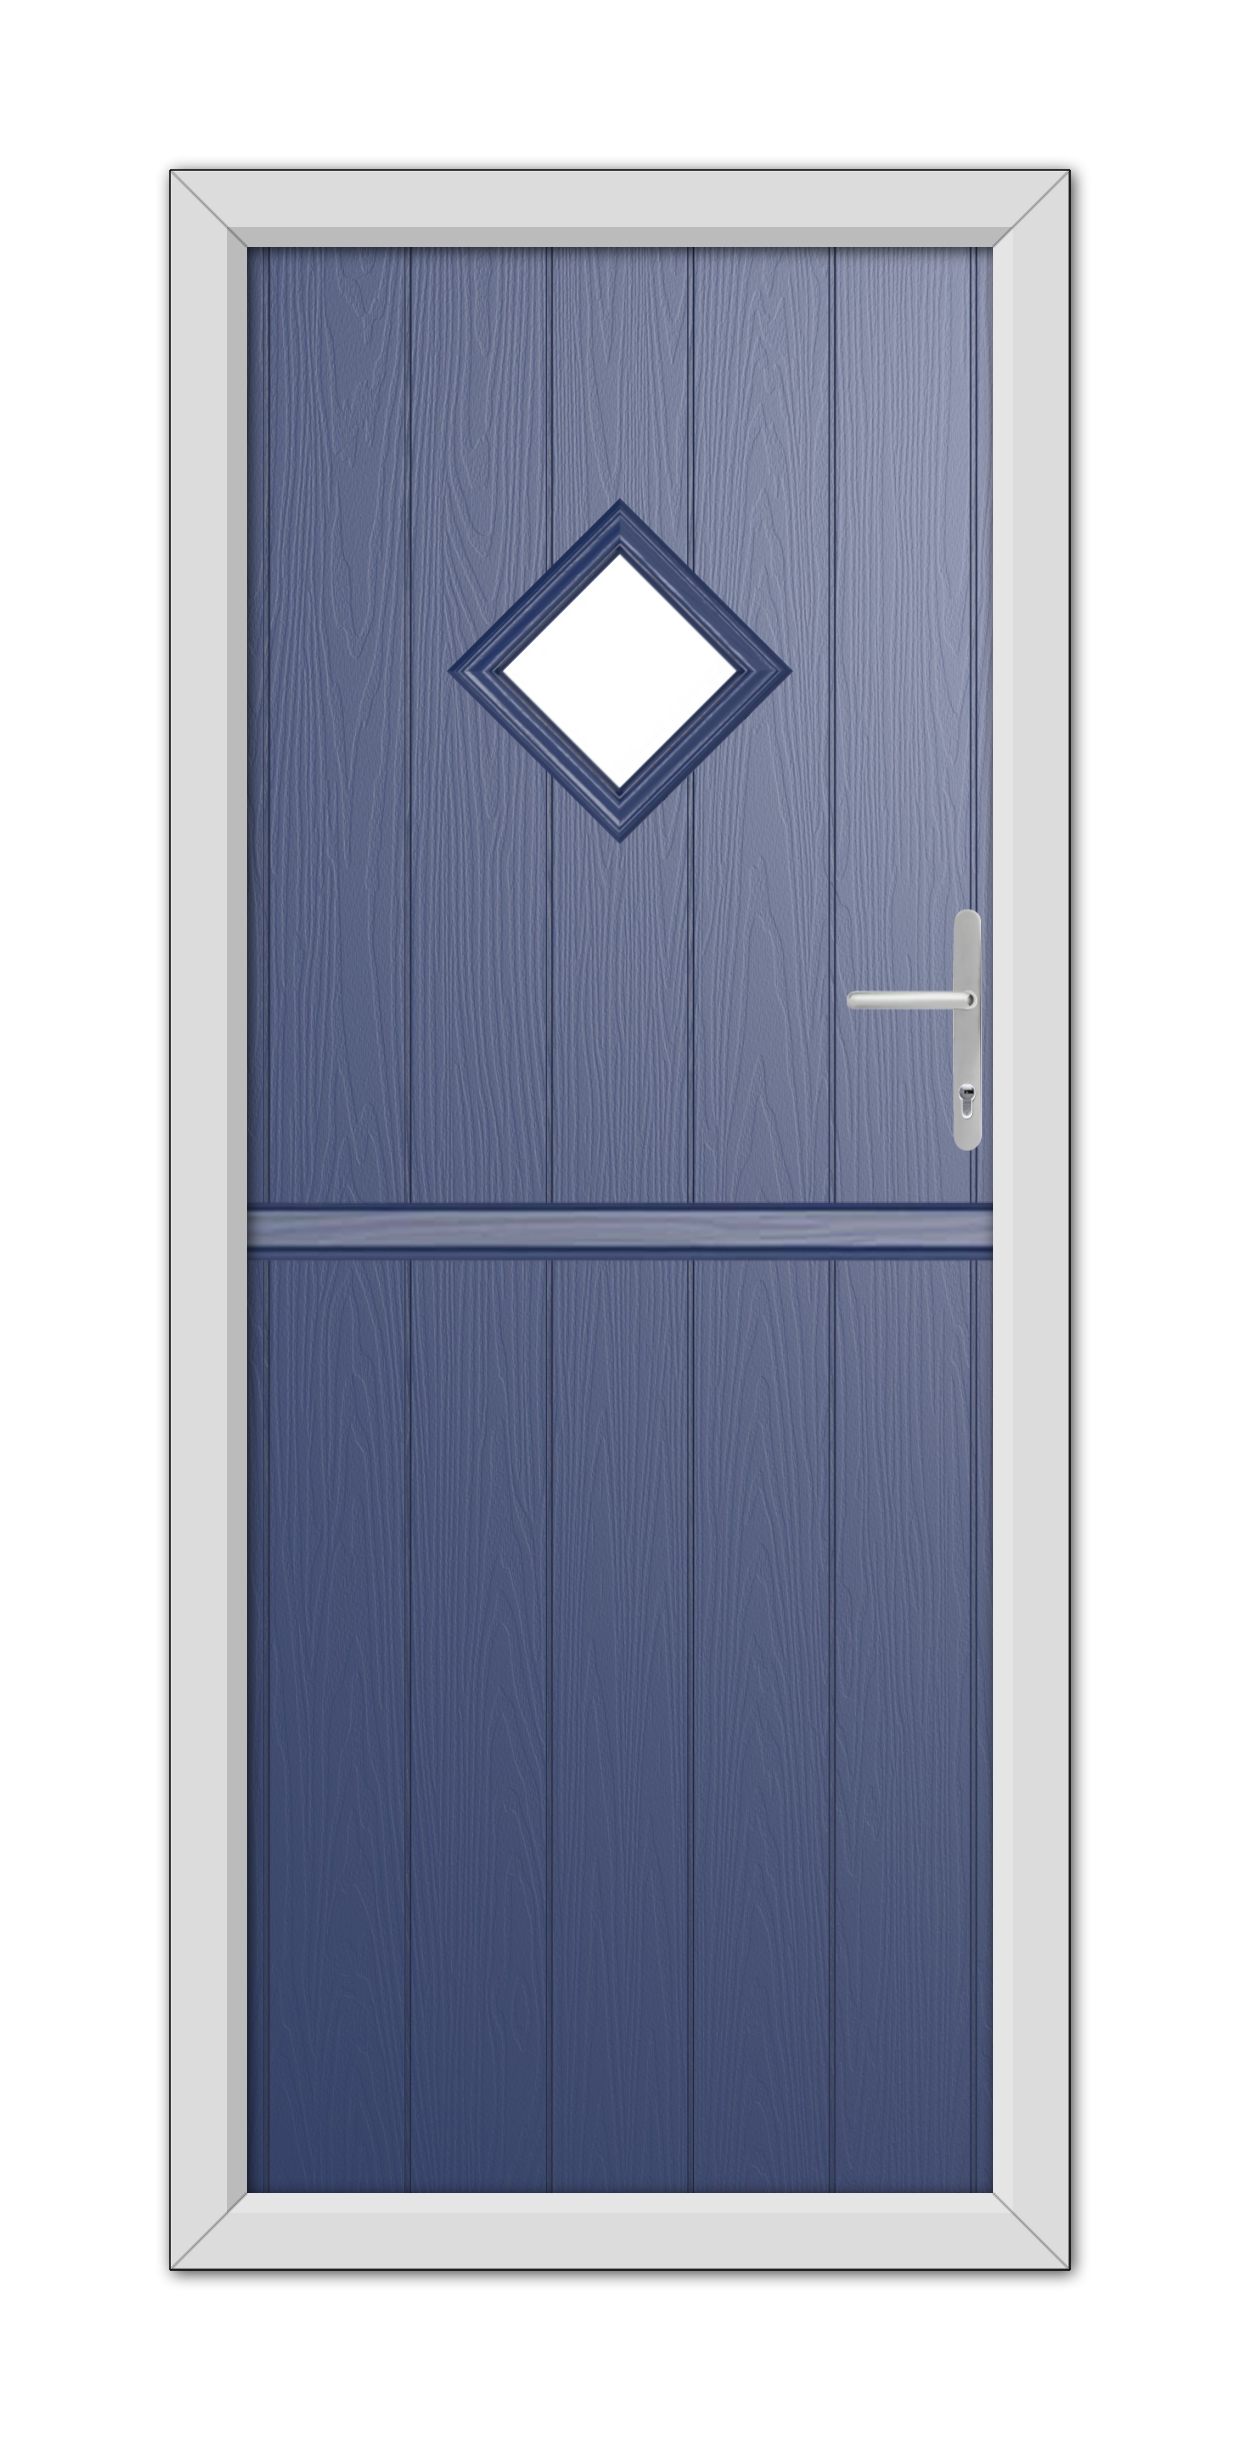 A Blue Cornwall Stable Composite Door 48mm Timber Core with a diamond-shaped window at the top, set within a white frame, featuring a modern silver handle on the right side.